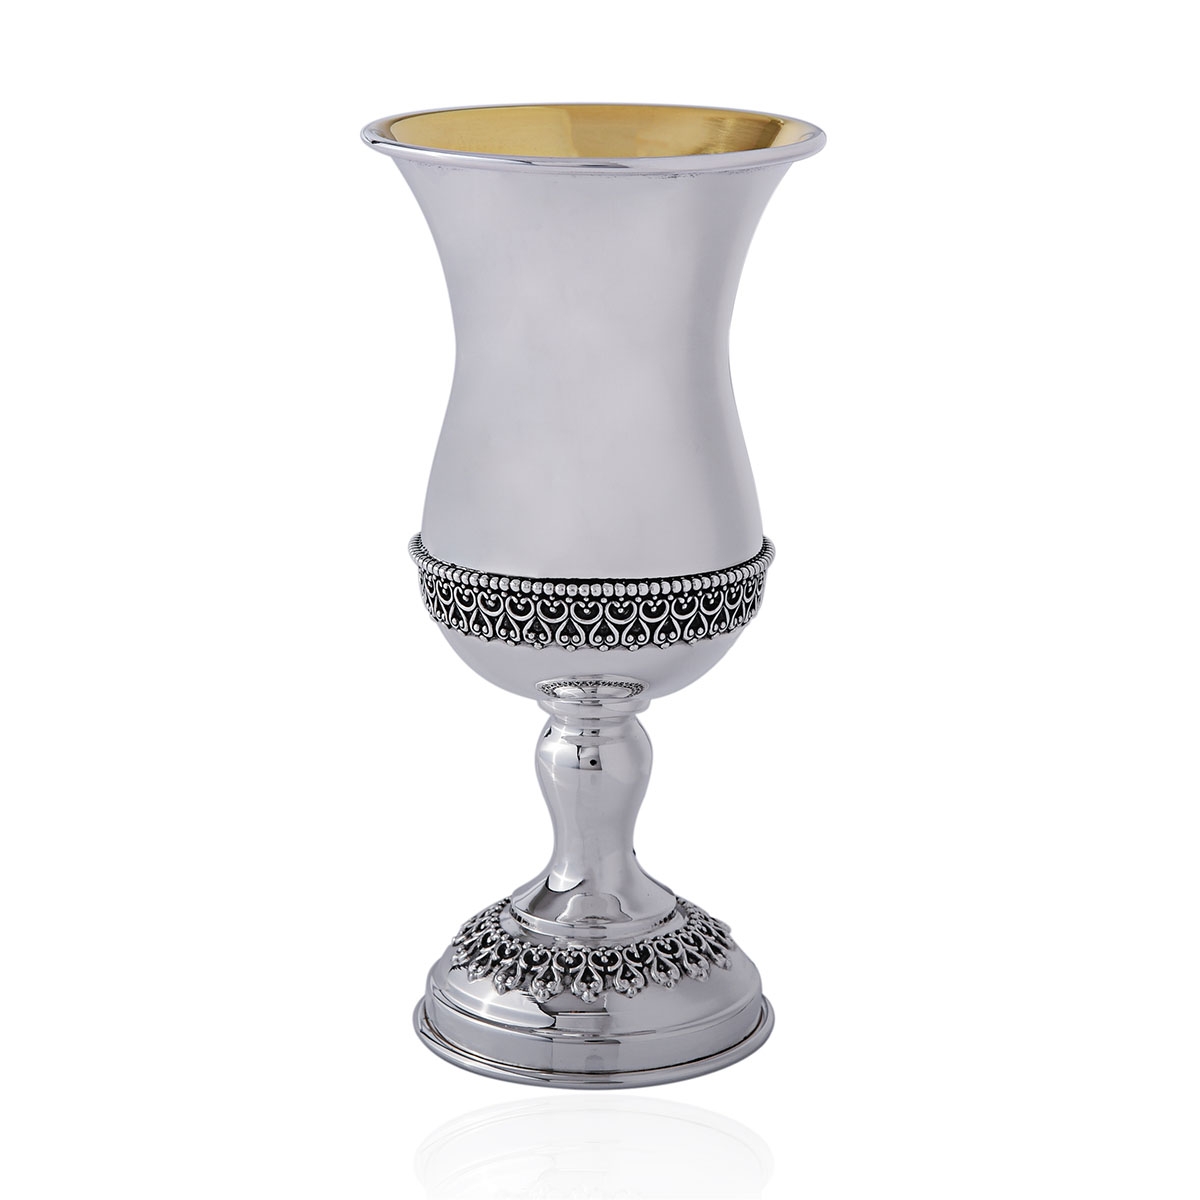 Polished 925 Sterling Silver Kiddush Cup With Filigree Design - 1